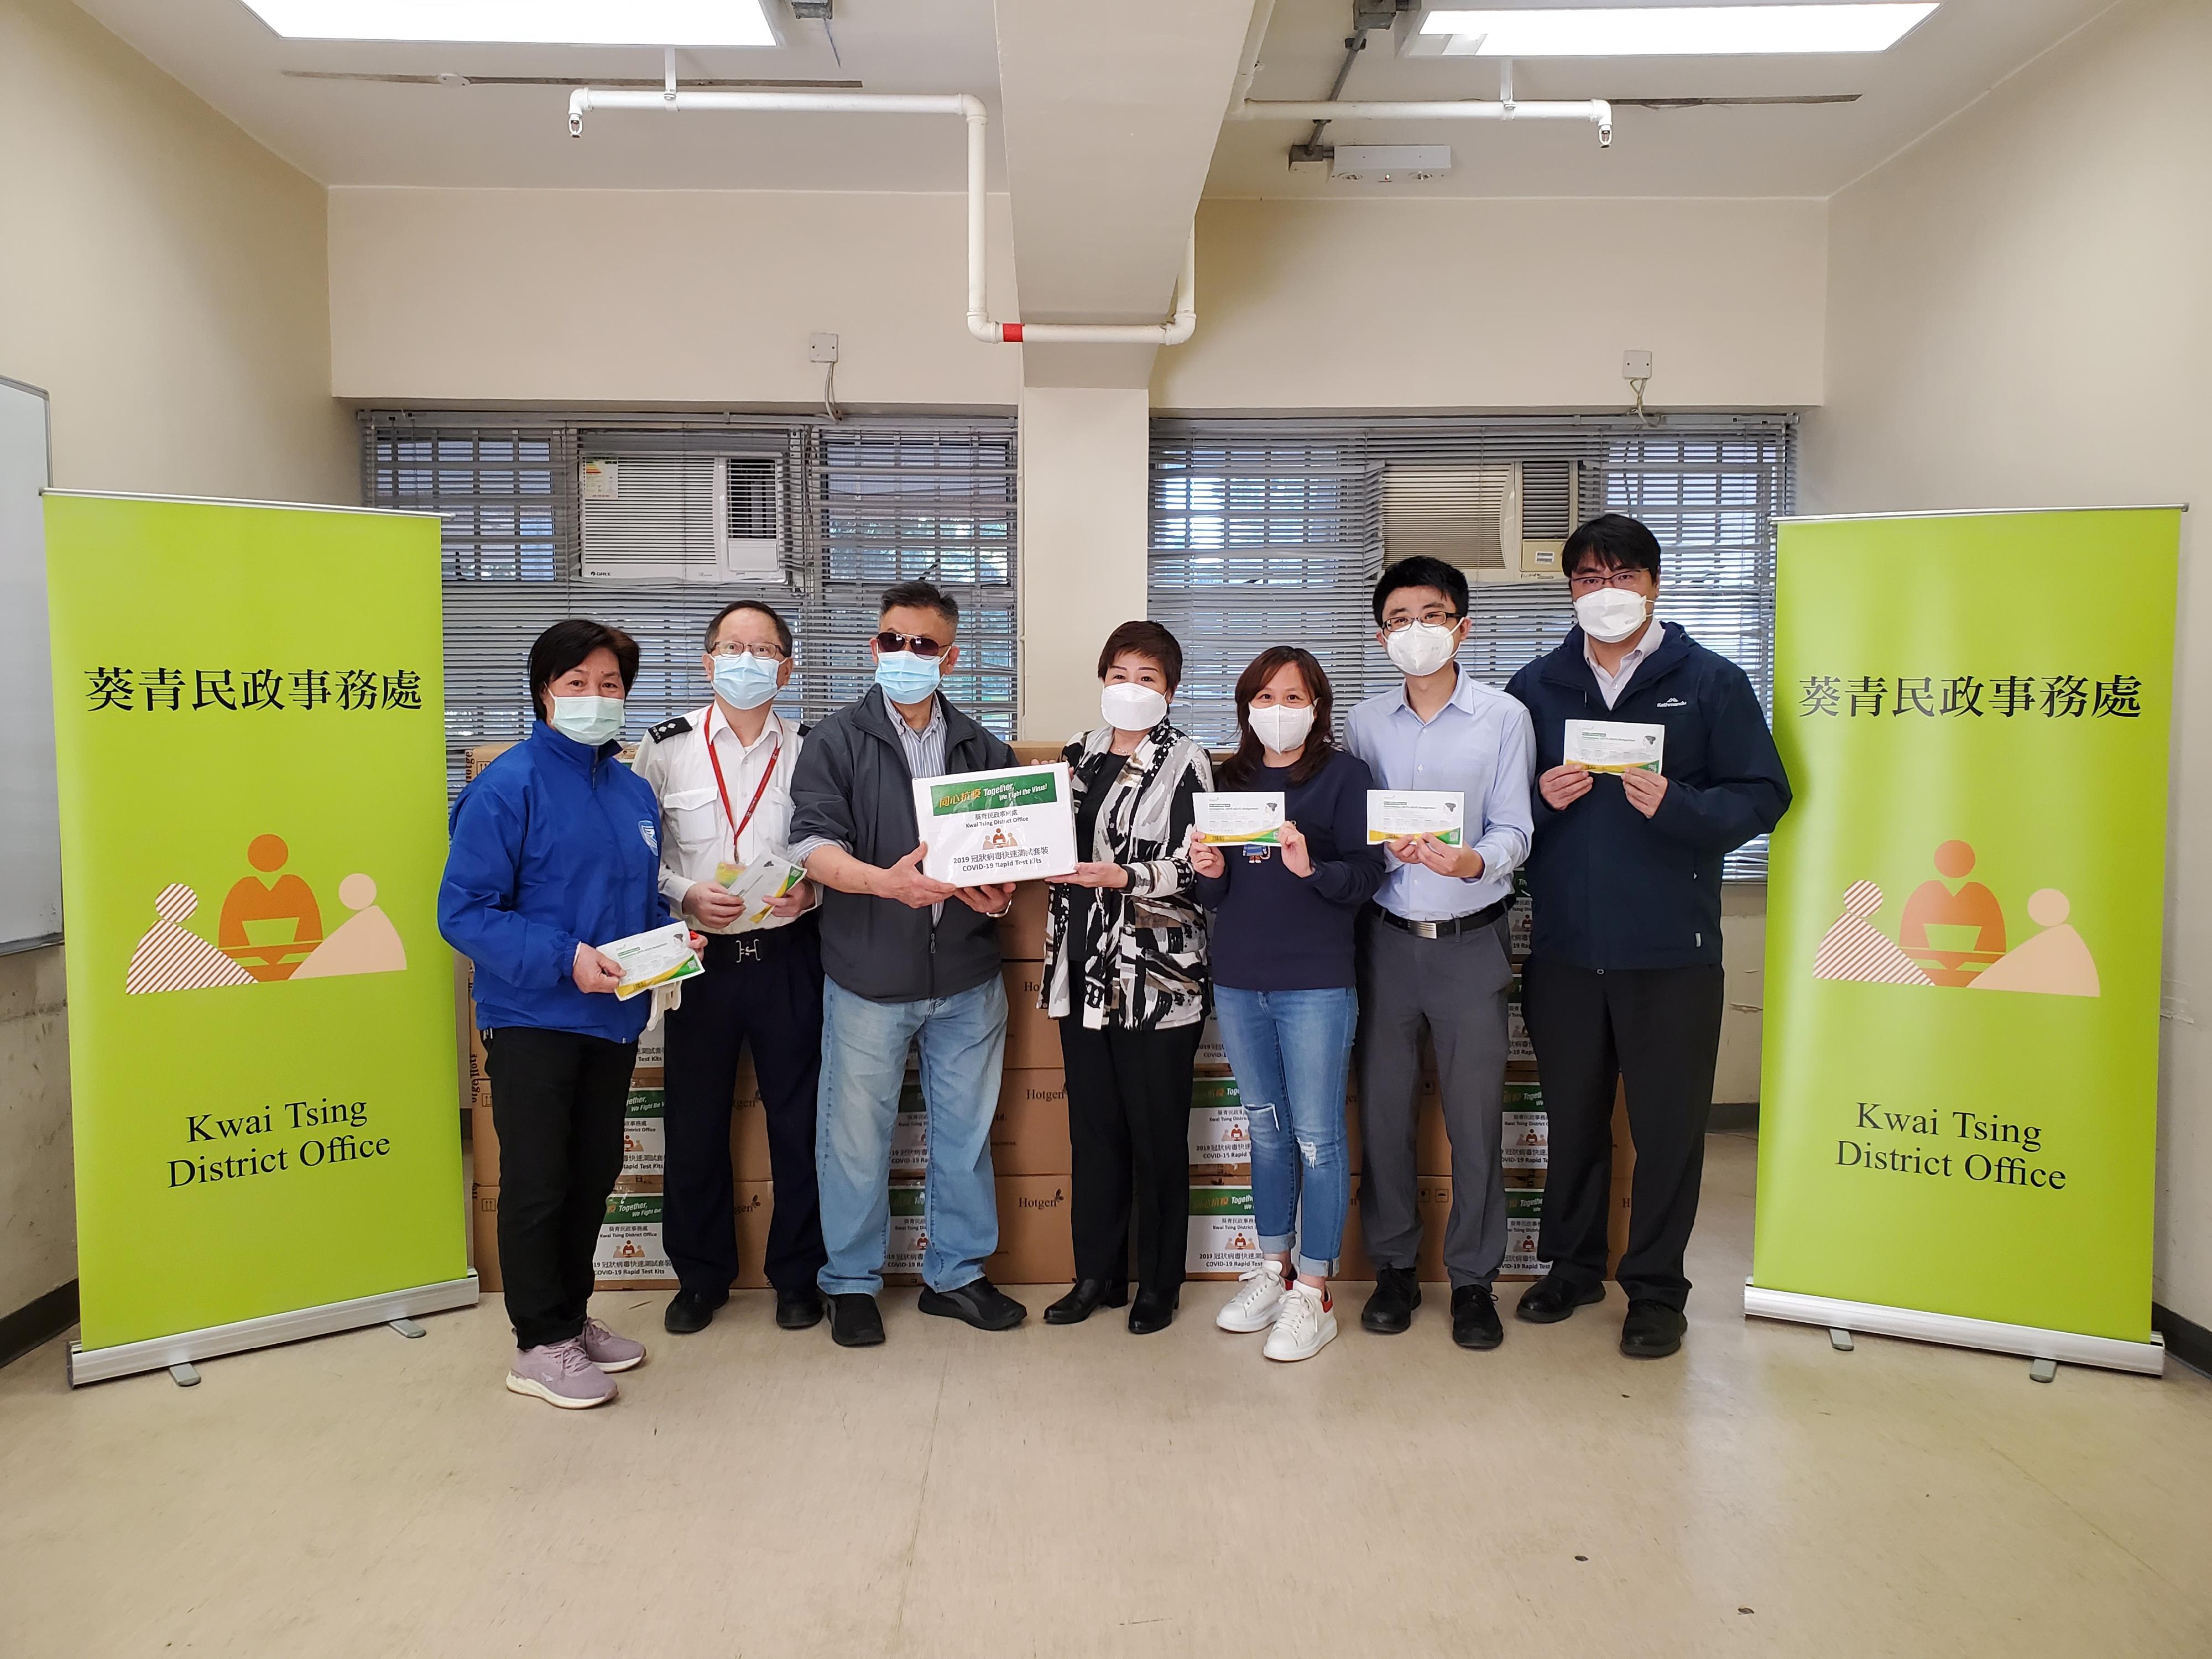 The Kwai Tsing District Office distributed COVID-19 rapid test kits to households, cleansing workers and property management staff living and working in Ching Nga Court for voluntary testing through the property management company.